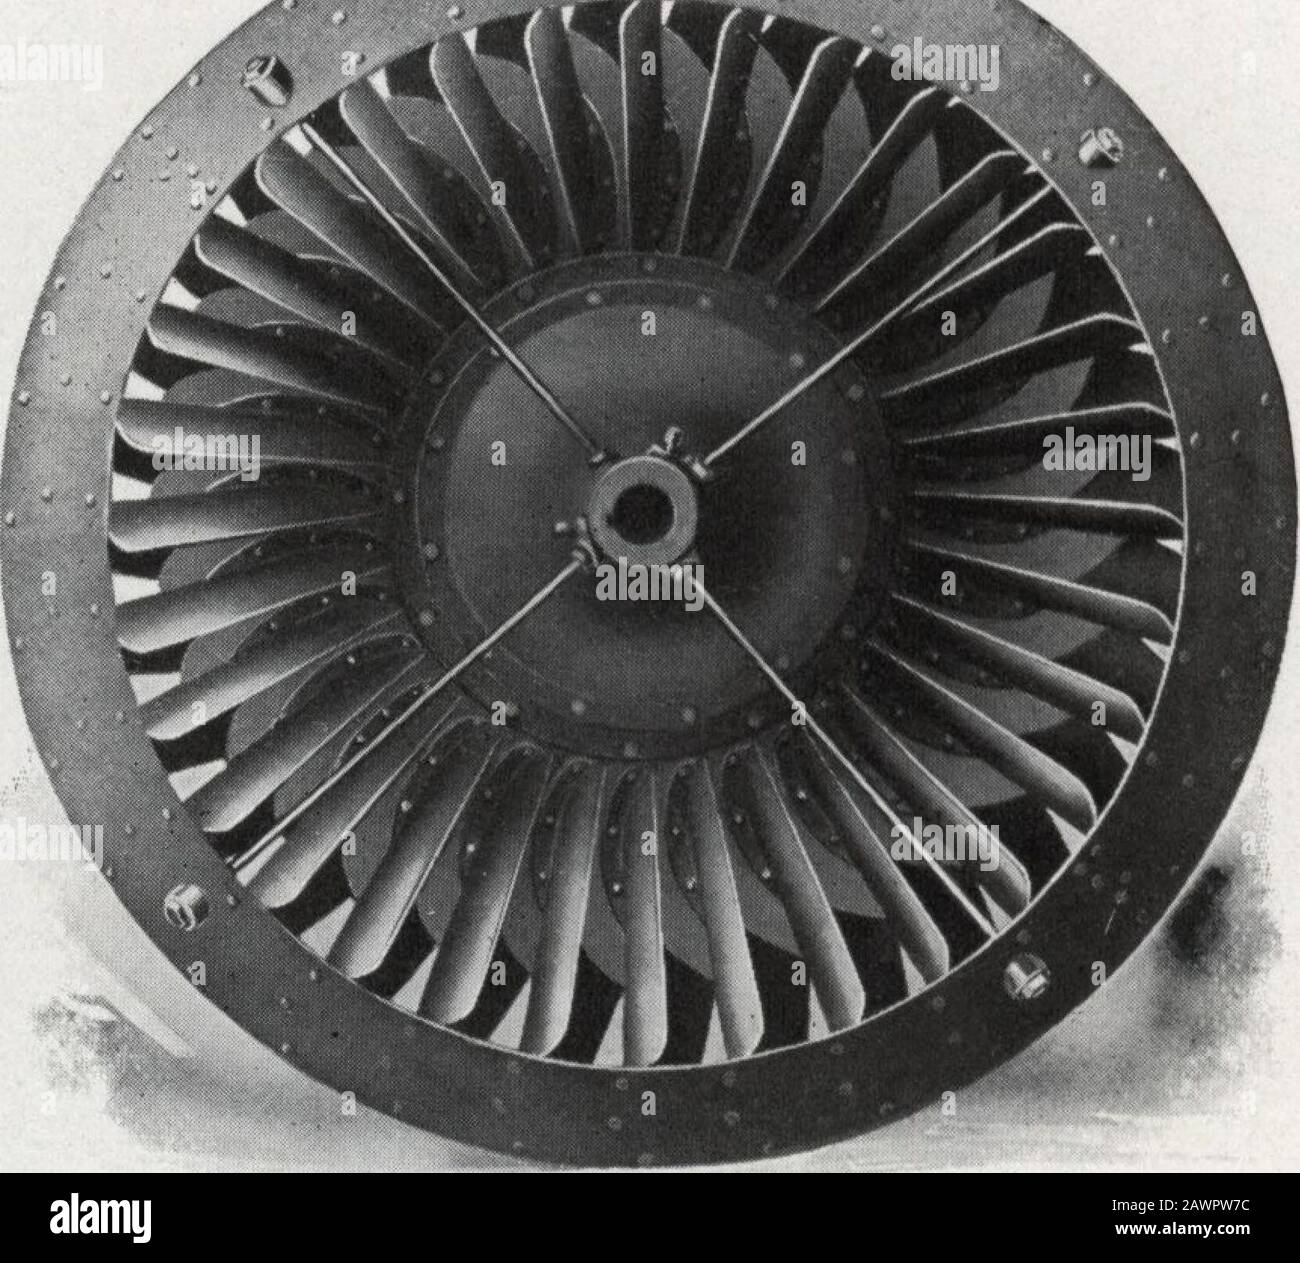 Catalog no201: Buffalo Niagara conoidal fans . Three*Quarter Housing Niagara Conoidal Fan, LeAHand Top Horizontal Disebarge, for Overhung PuUey or Direct Connection 11 BUFFALO FORGE COMPANY. Niagara Conoidal Wheel, Inlet Side SHAFT Shaft is of open hearth steel, extra hcavy, with a large factor of safetyand accurately ground to size. BALANCE AU fan wheels are given a standing balance by a special device whichinsures as accurate a degree of balance as m possible with any method ofrotating balance. Wheel and shaft are assembled and mounted on a per- fectly smooth surface, which is leveled on kni Stock Photo